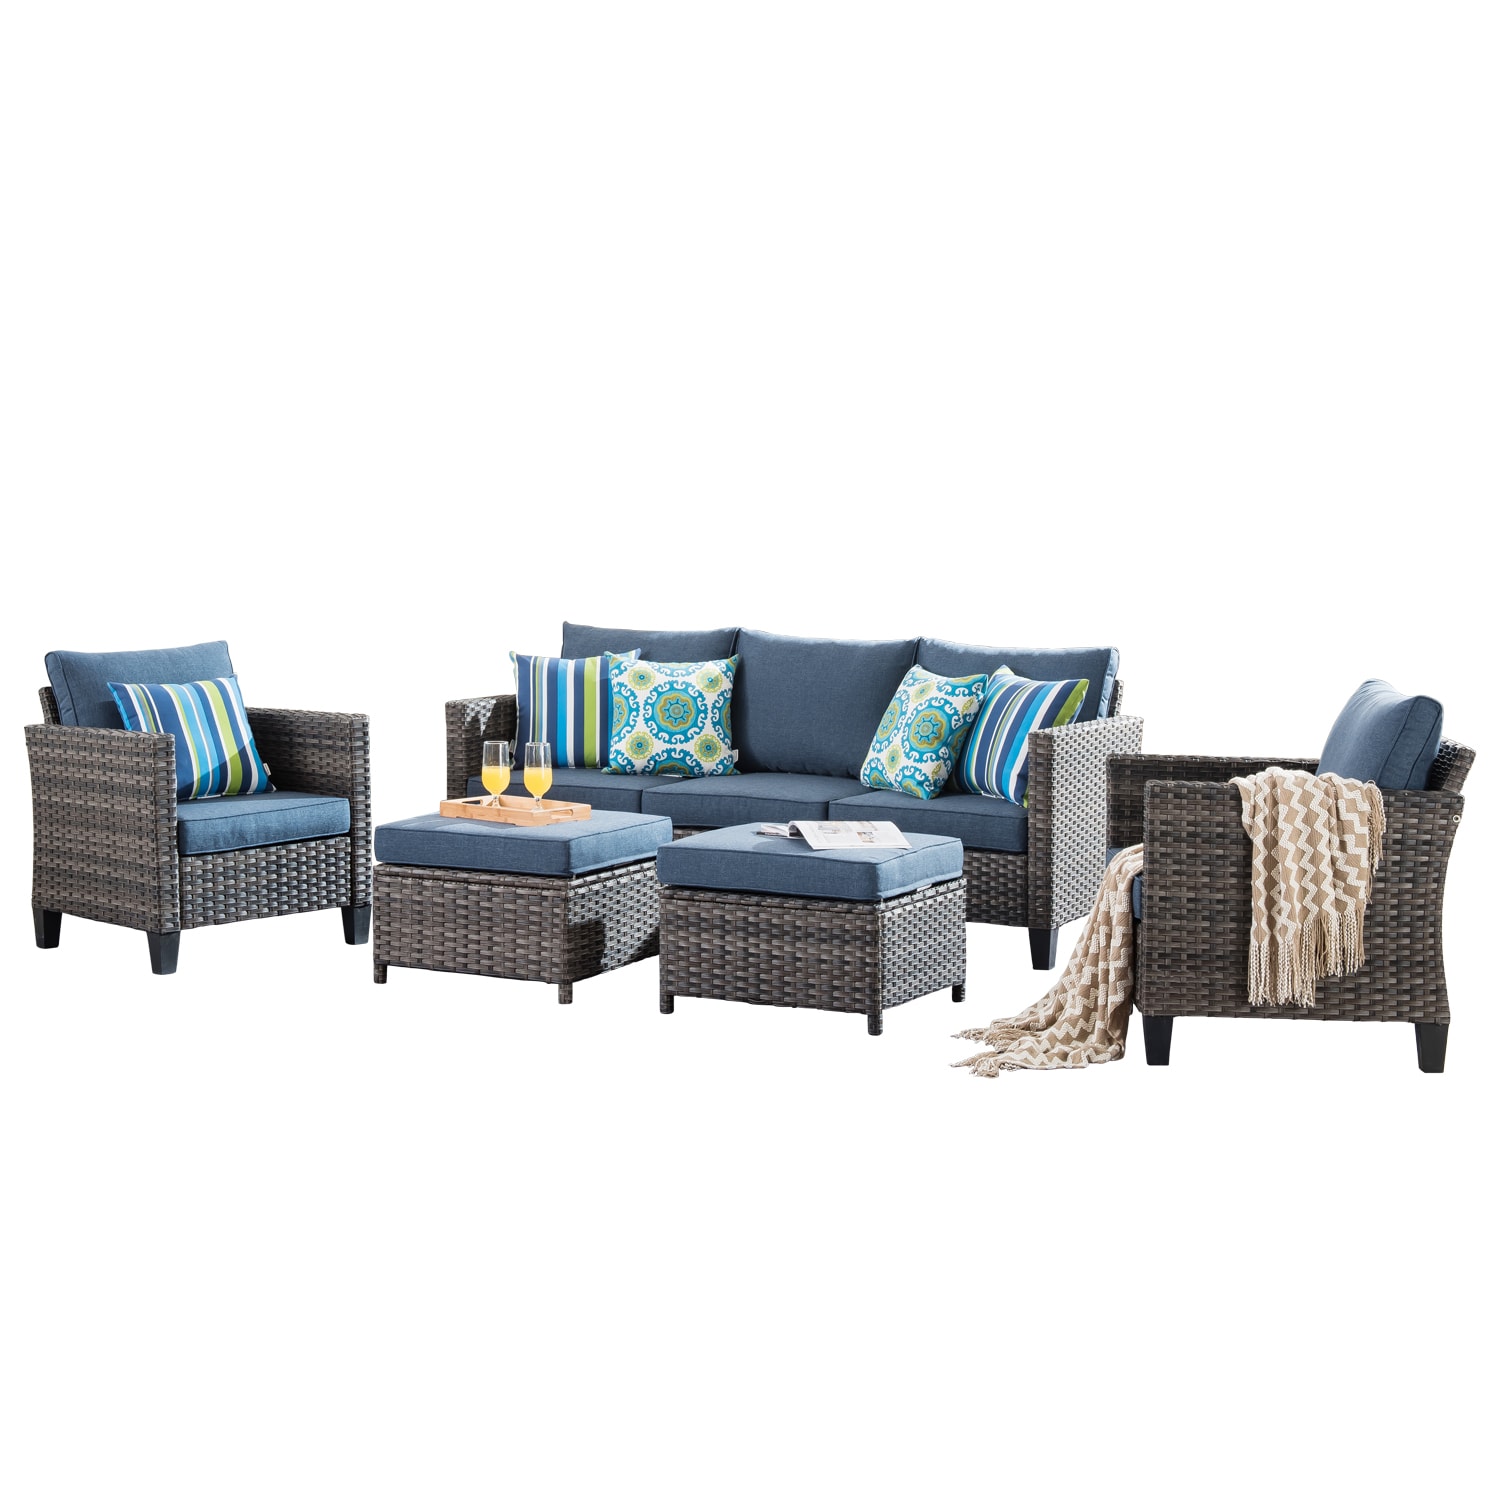 Ovios New Vultros 5-Piece Woven Patio Conversation Set with Cushions on Sale At Lowe's